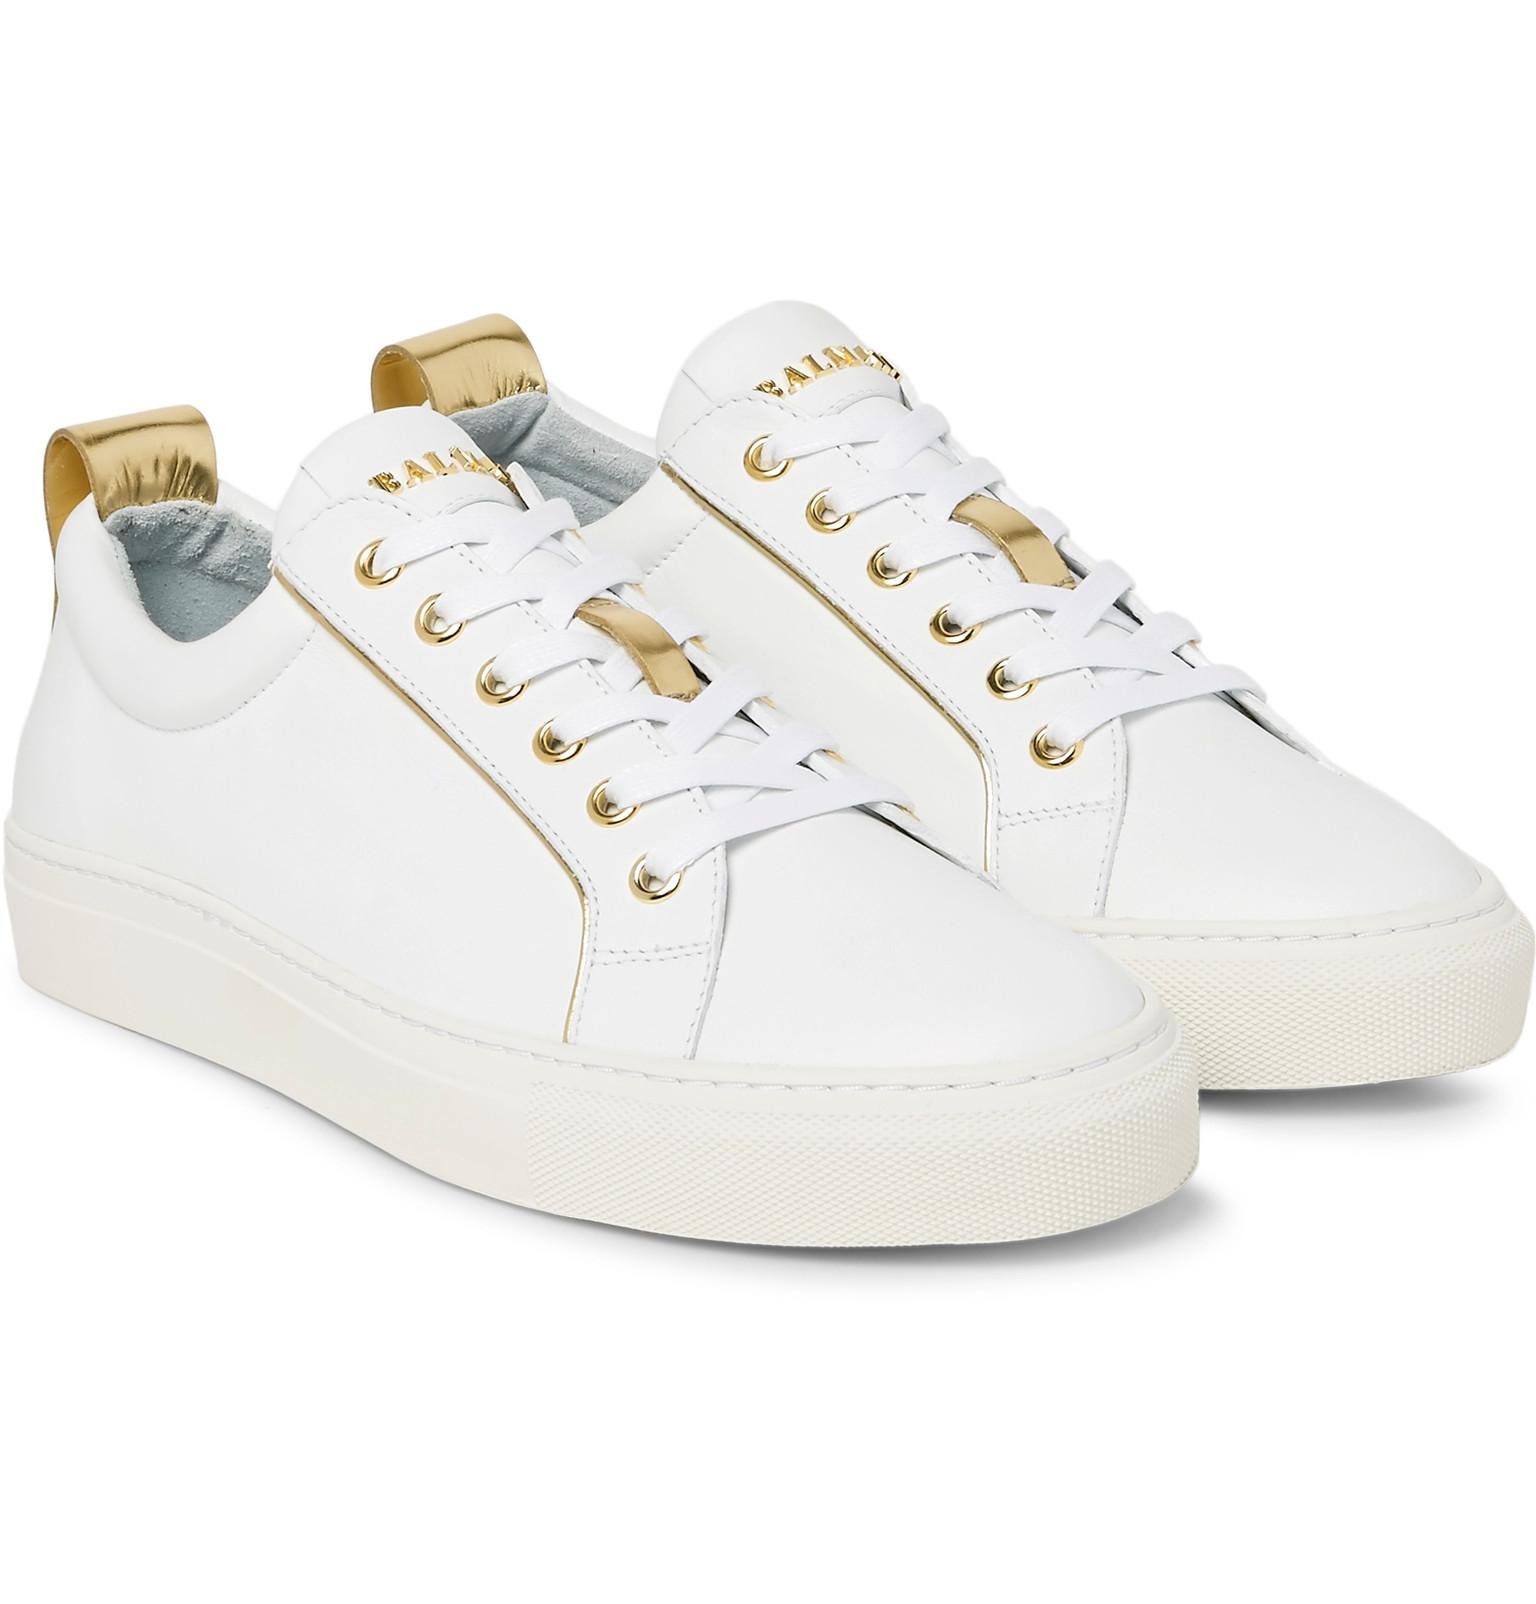 Lyst - Balmain Metallic-trimmed Leather Sneakers in White for Men